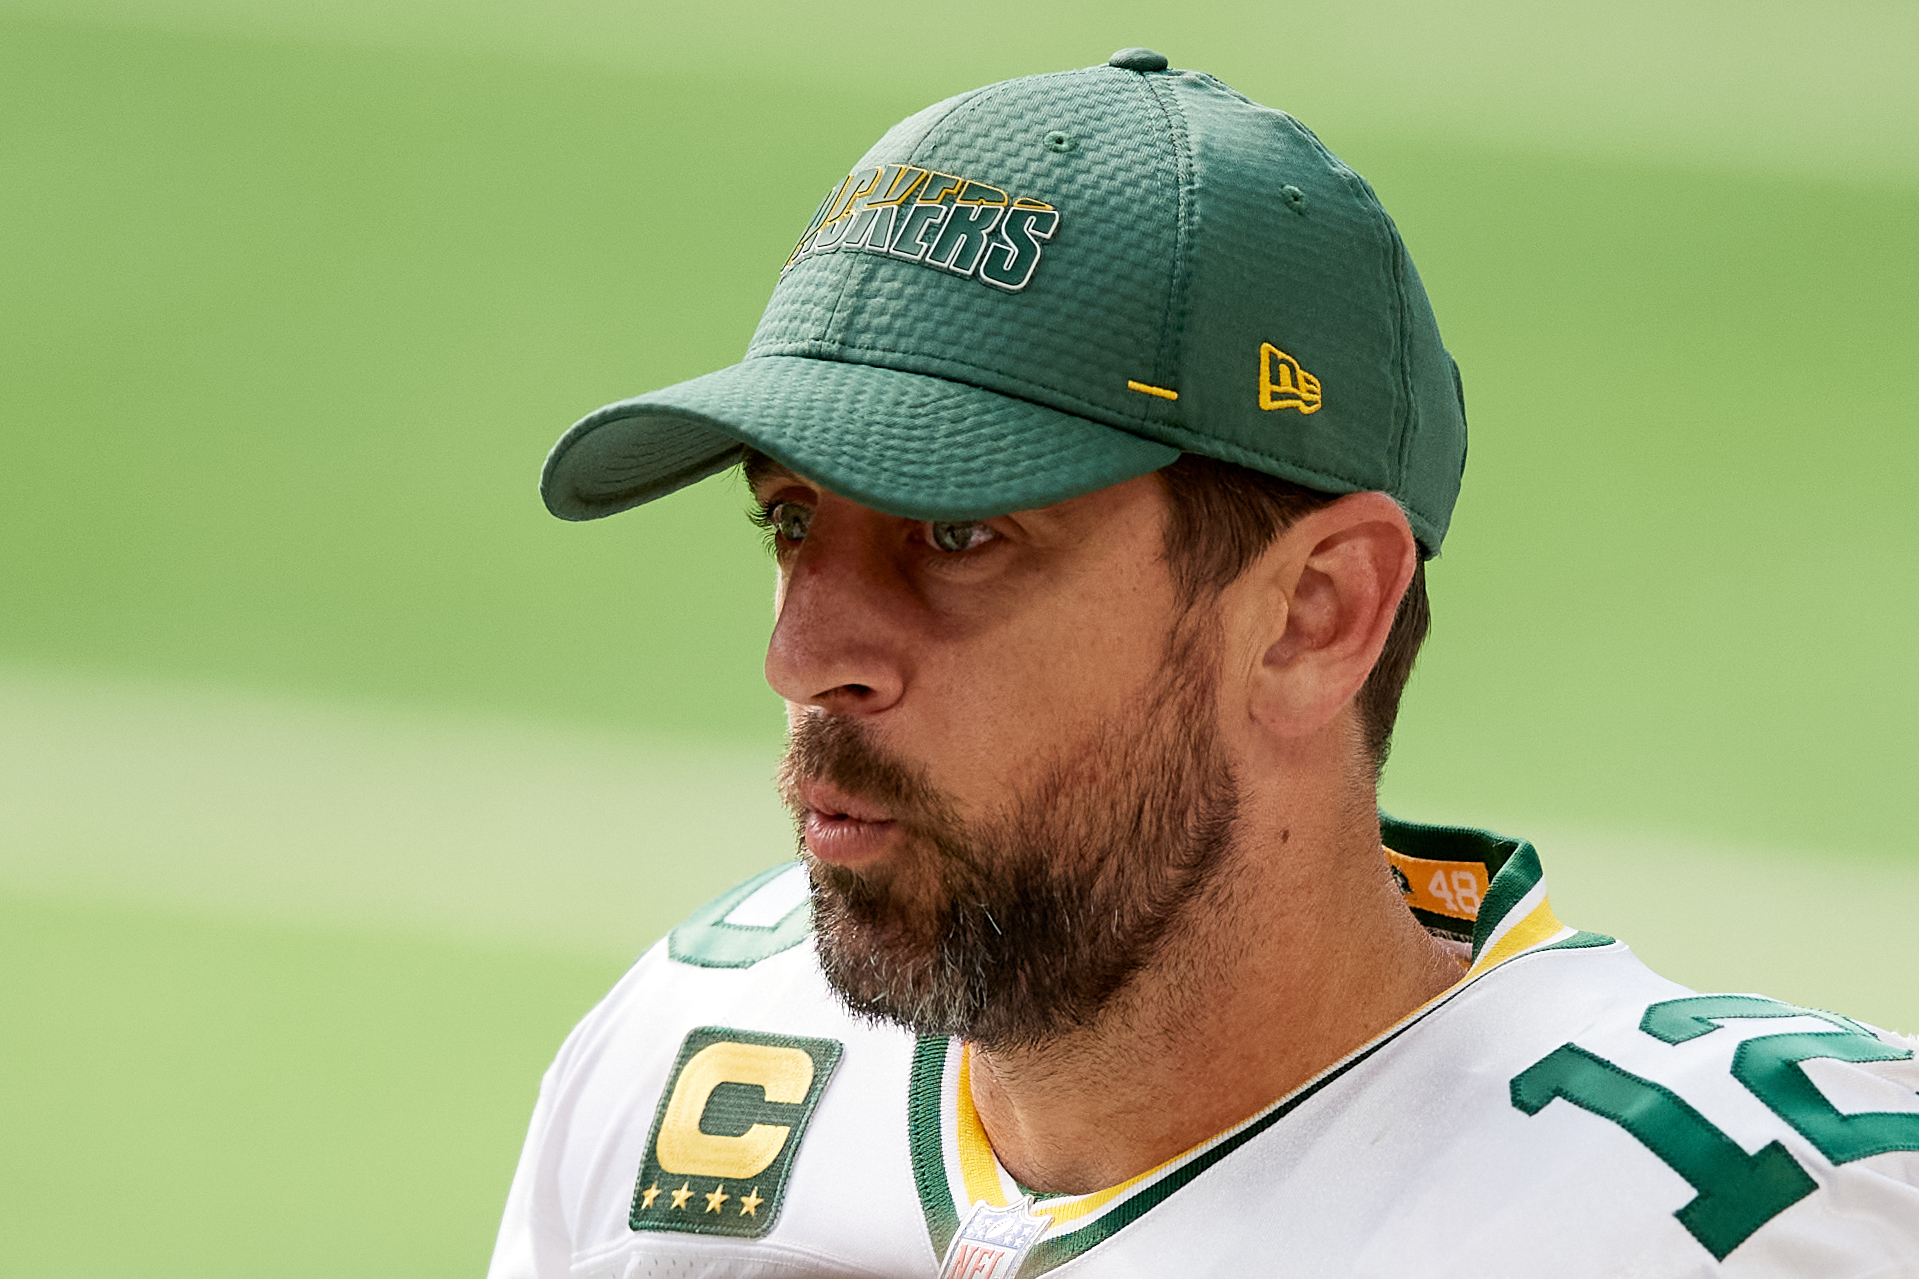 What Is Aaron Rodgers' Net Worth After Becoming 1 of the Best QBs Ever?